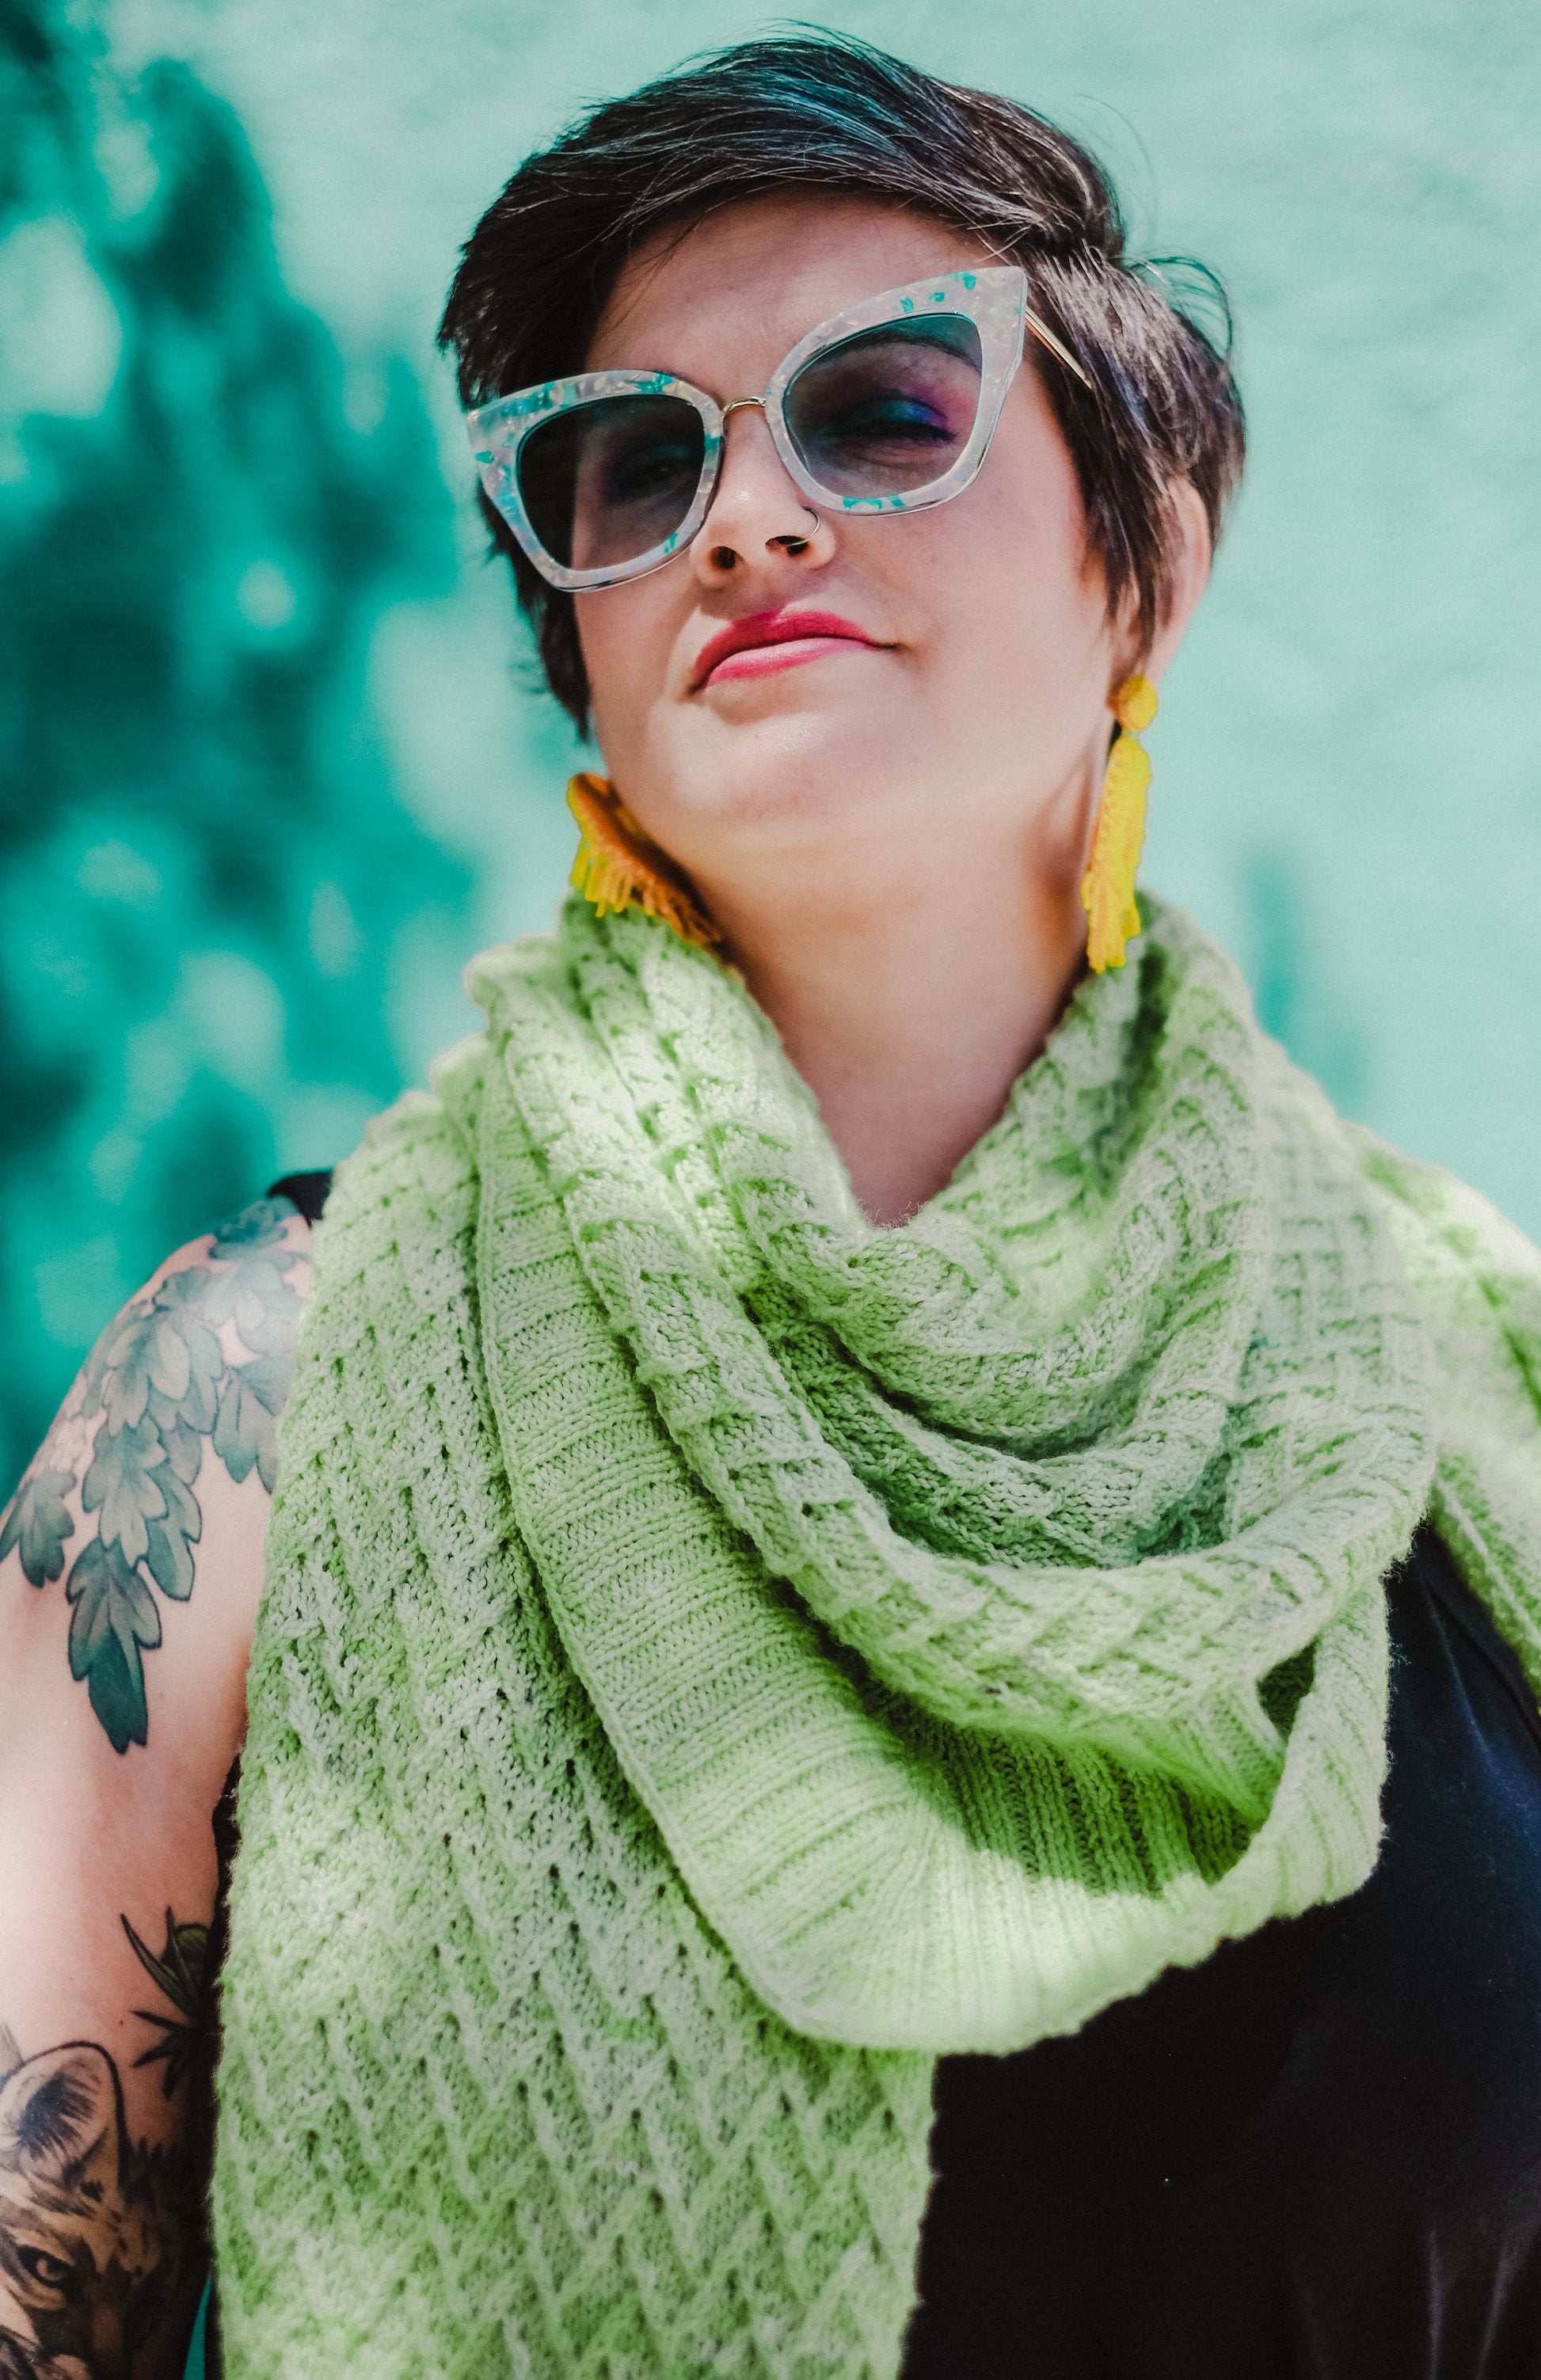 Jen, head tilted towards the sun, wears a hand knit, lime green shawl with sunglasses and large tassel earrings. The shawl has a chevron cable pattern with a ribbed edge.